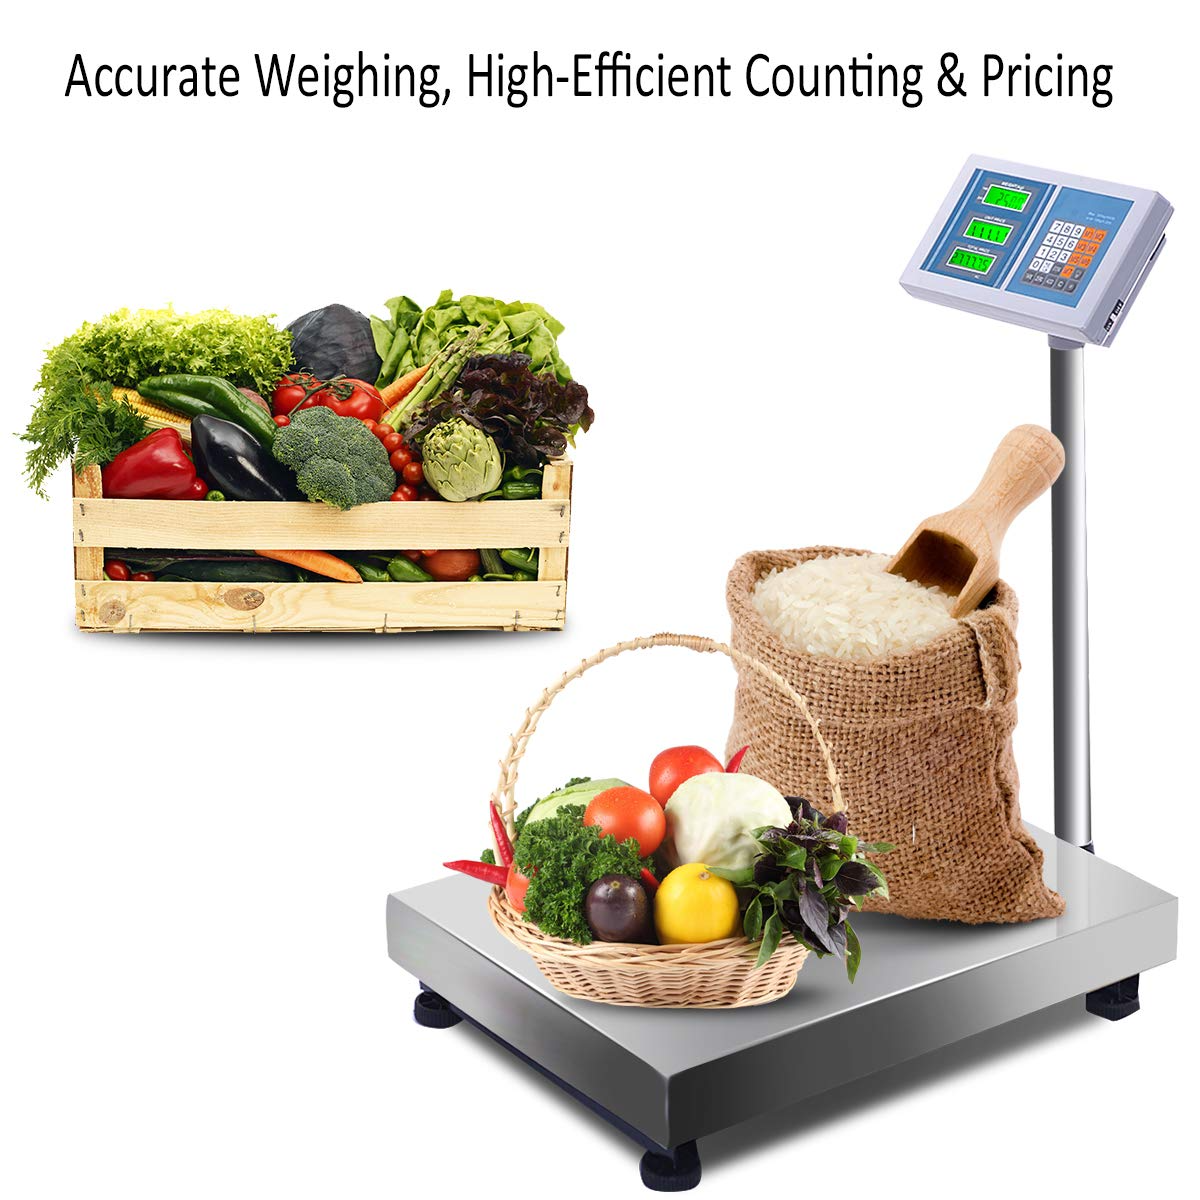 Digital Commercial Price Scale 66 lbs for Food Meat Fruit Produce with  Green Backlight LCD Display Stainless Steel Platform Battery Included Not  for